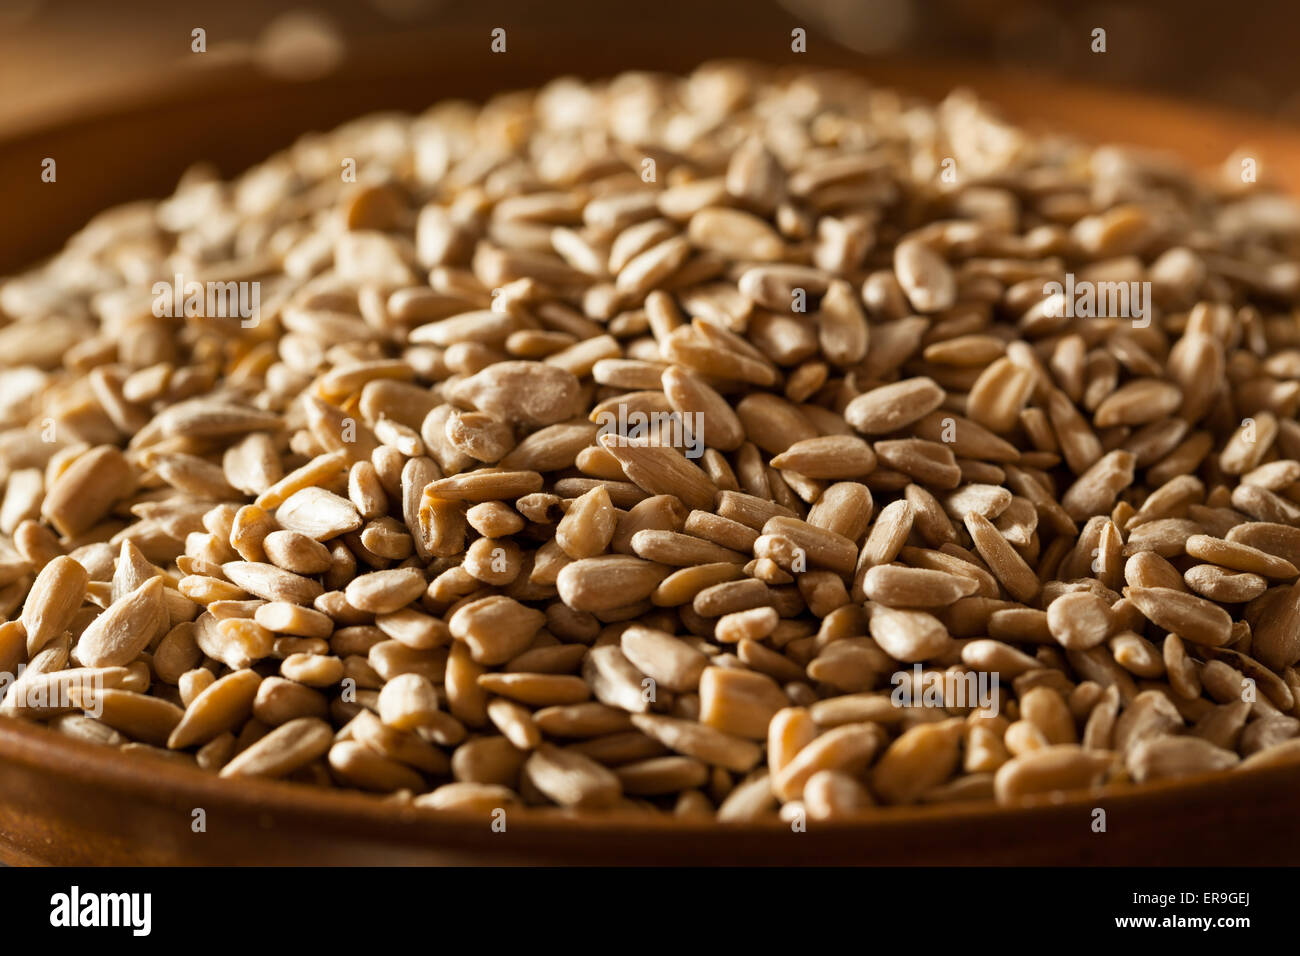 Raw Organic Hulled Sunflower Seeds in a Bowl Stock Photo